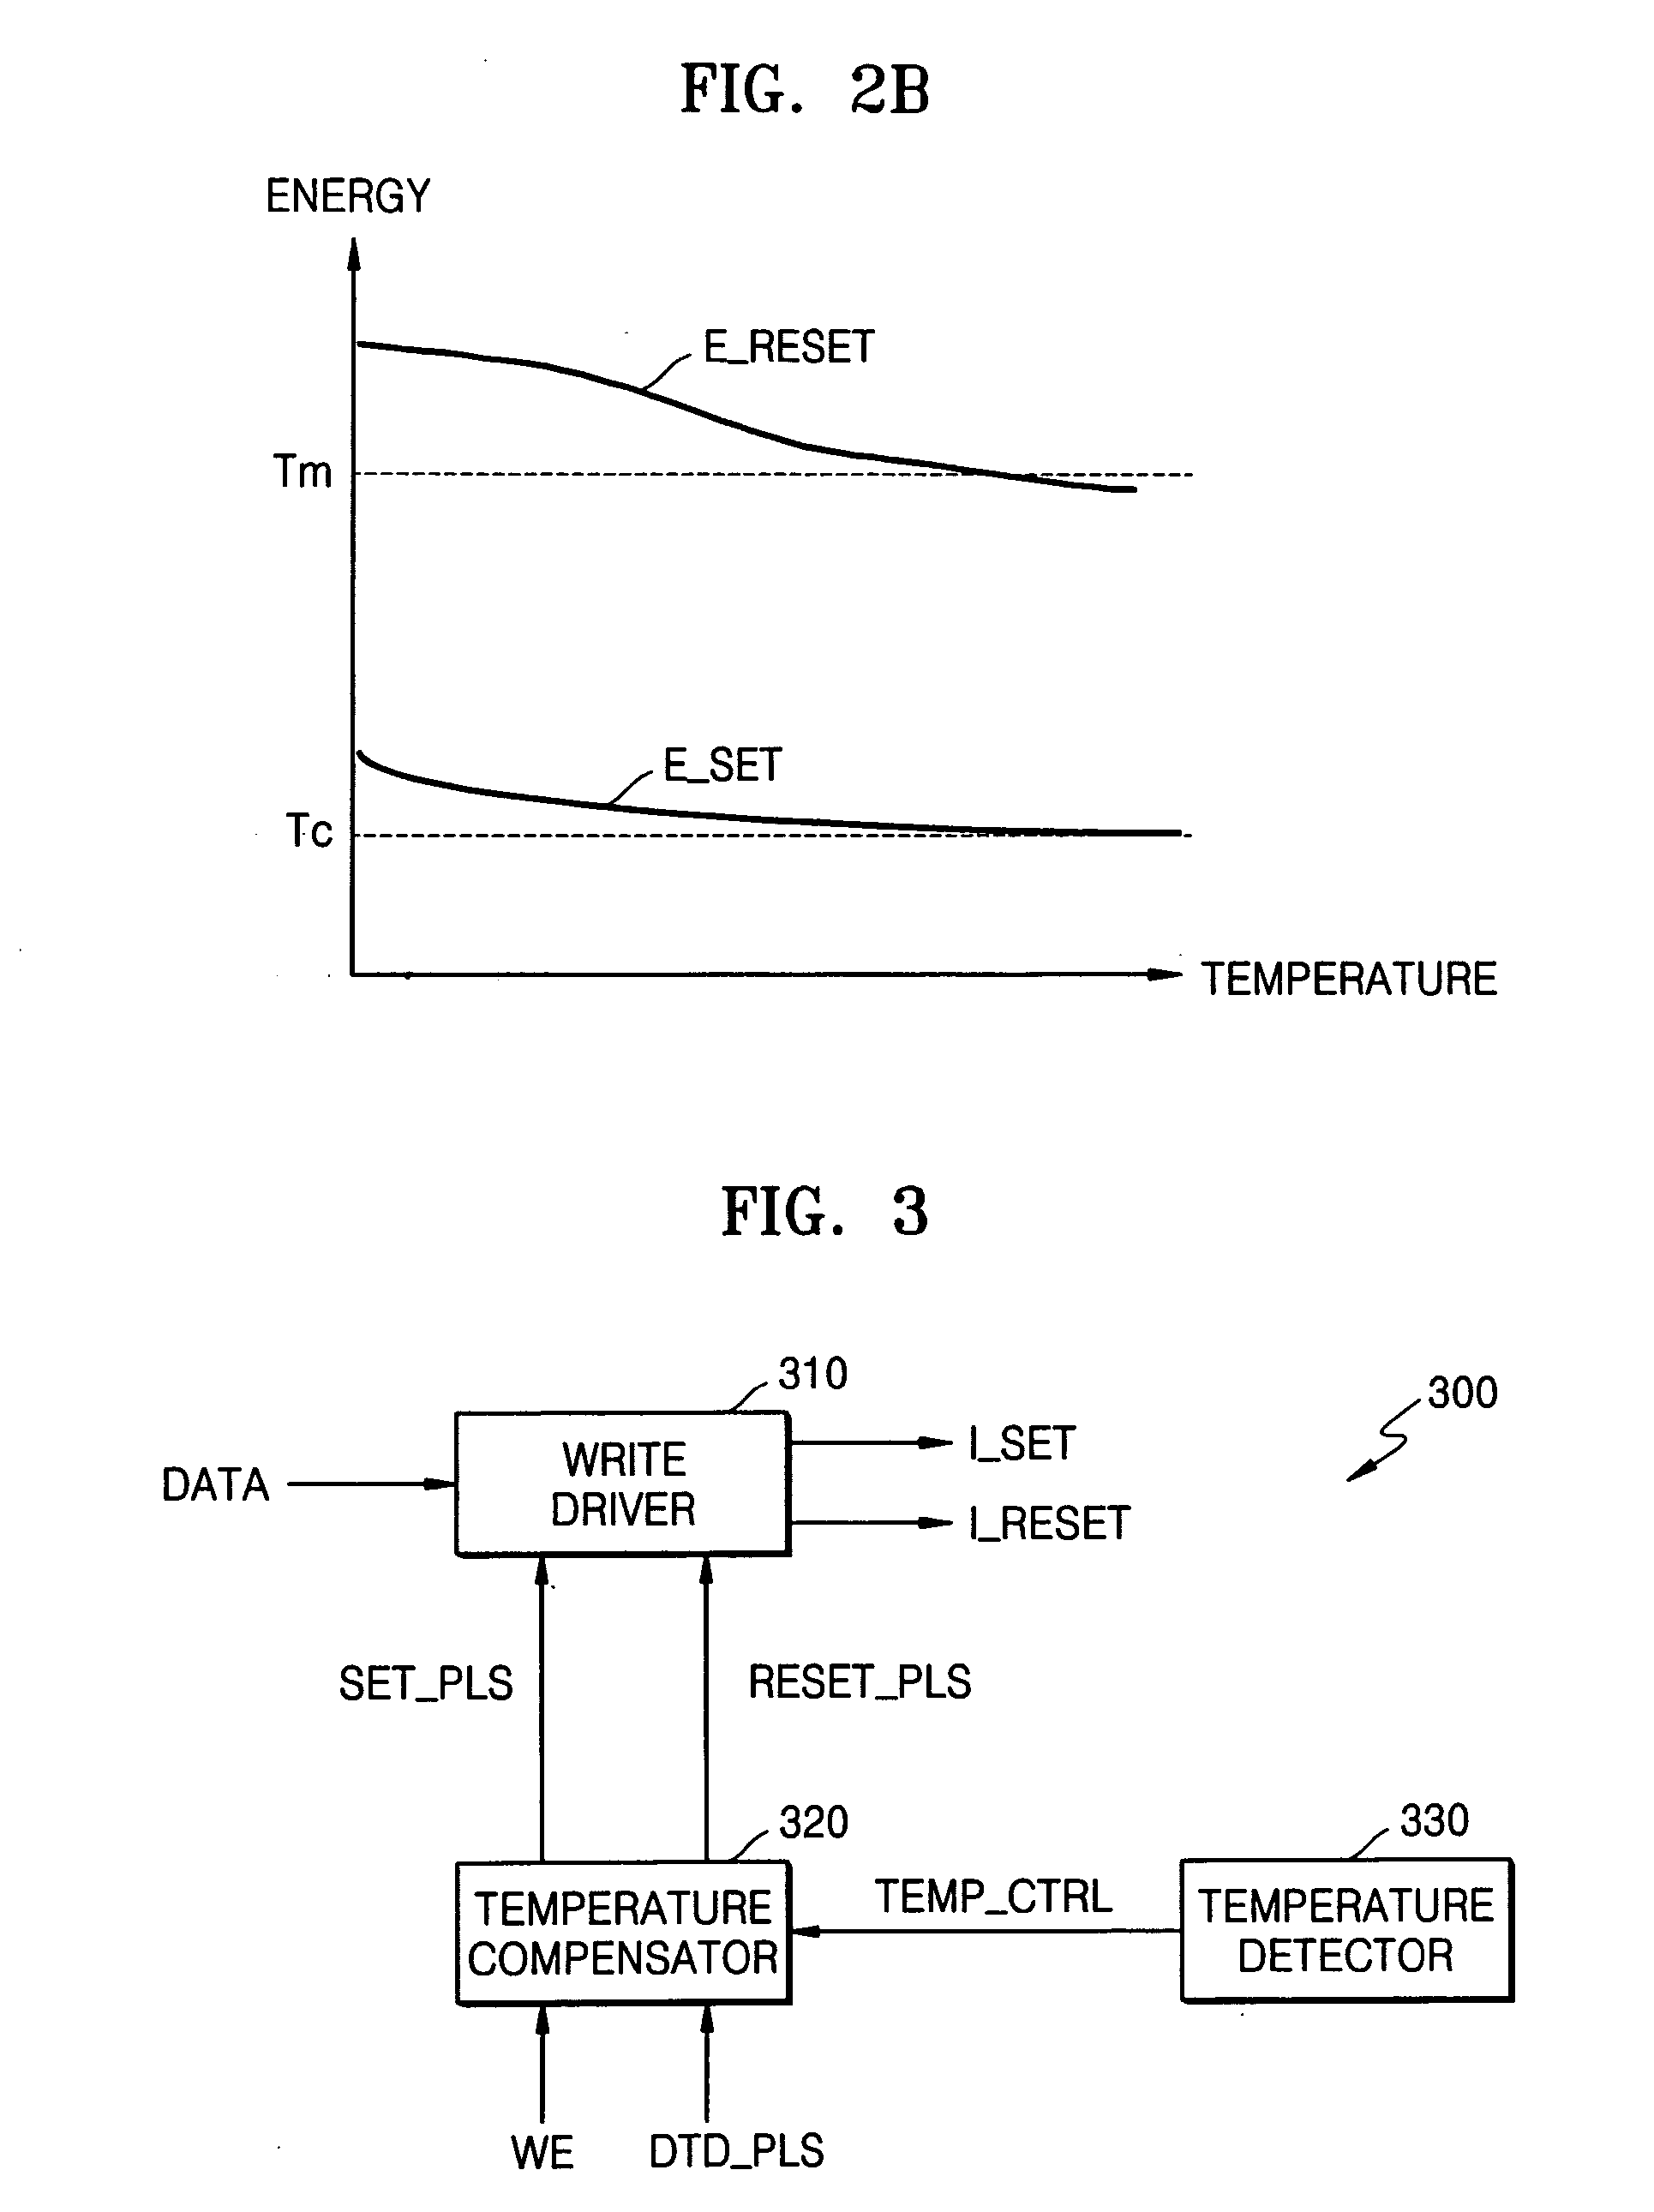 Control of set/reset pulse in response to peripheral temperature in PRAM device